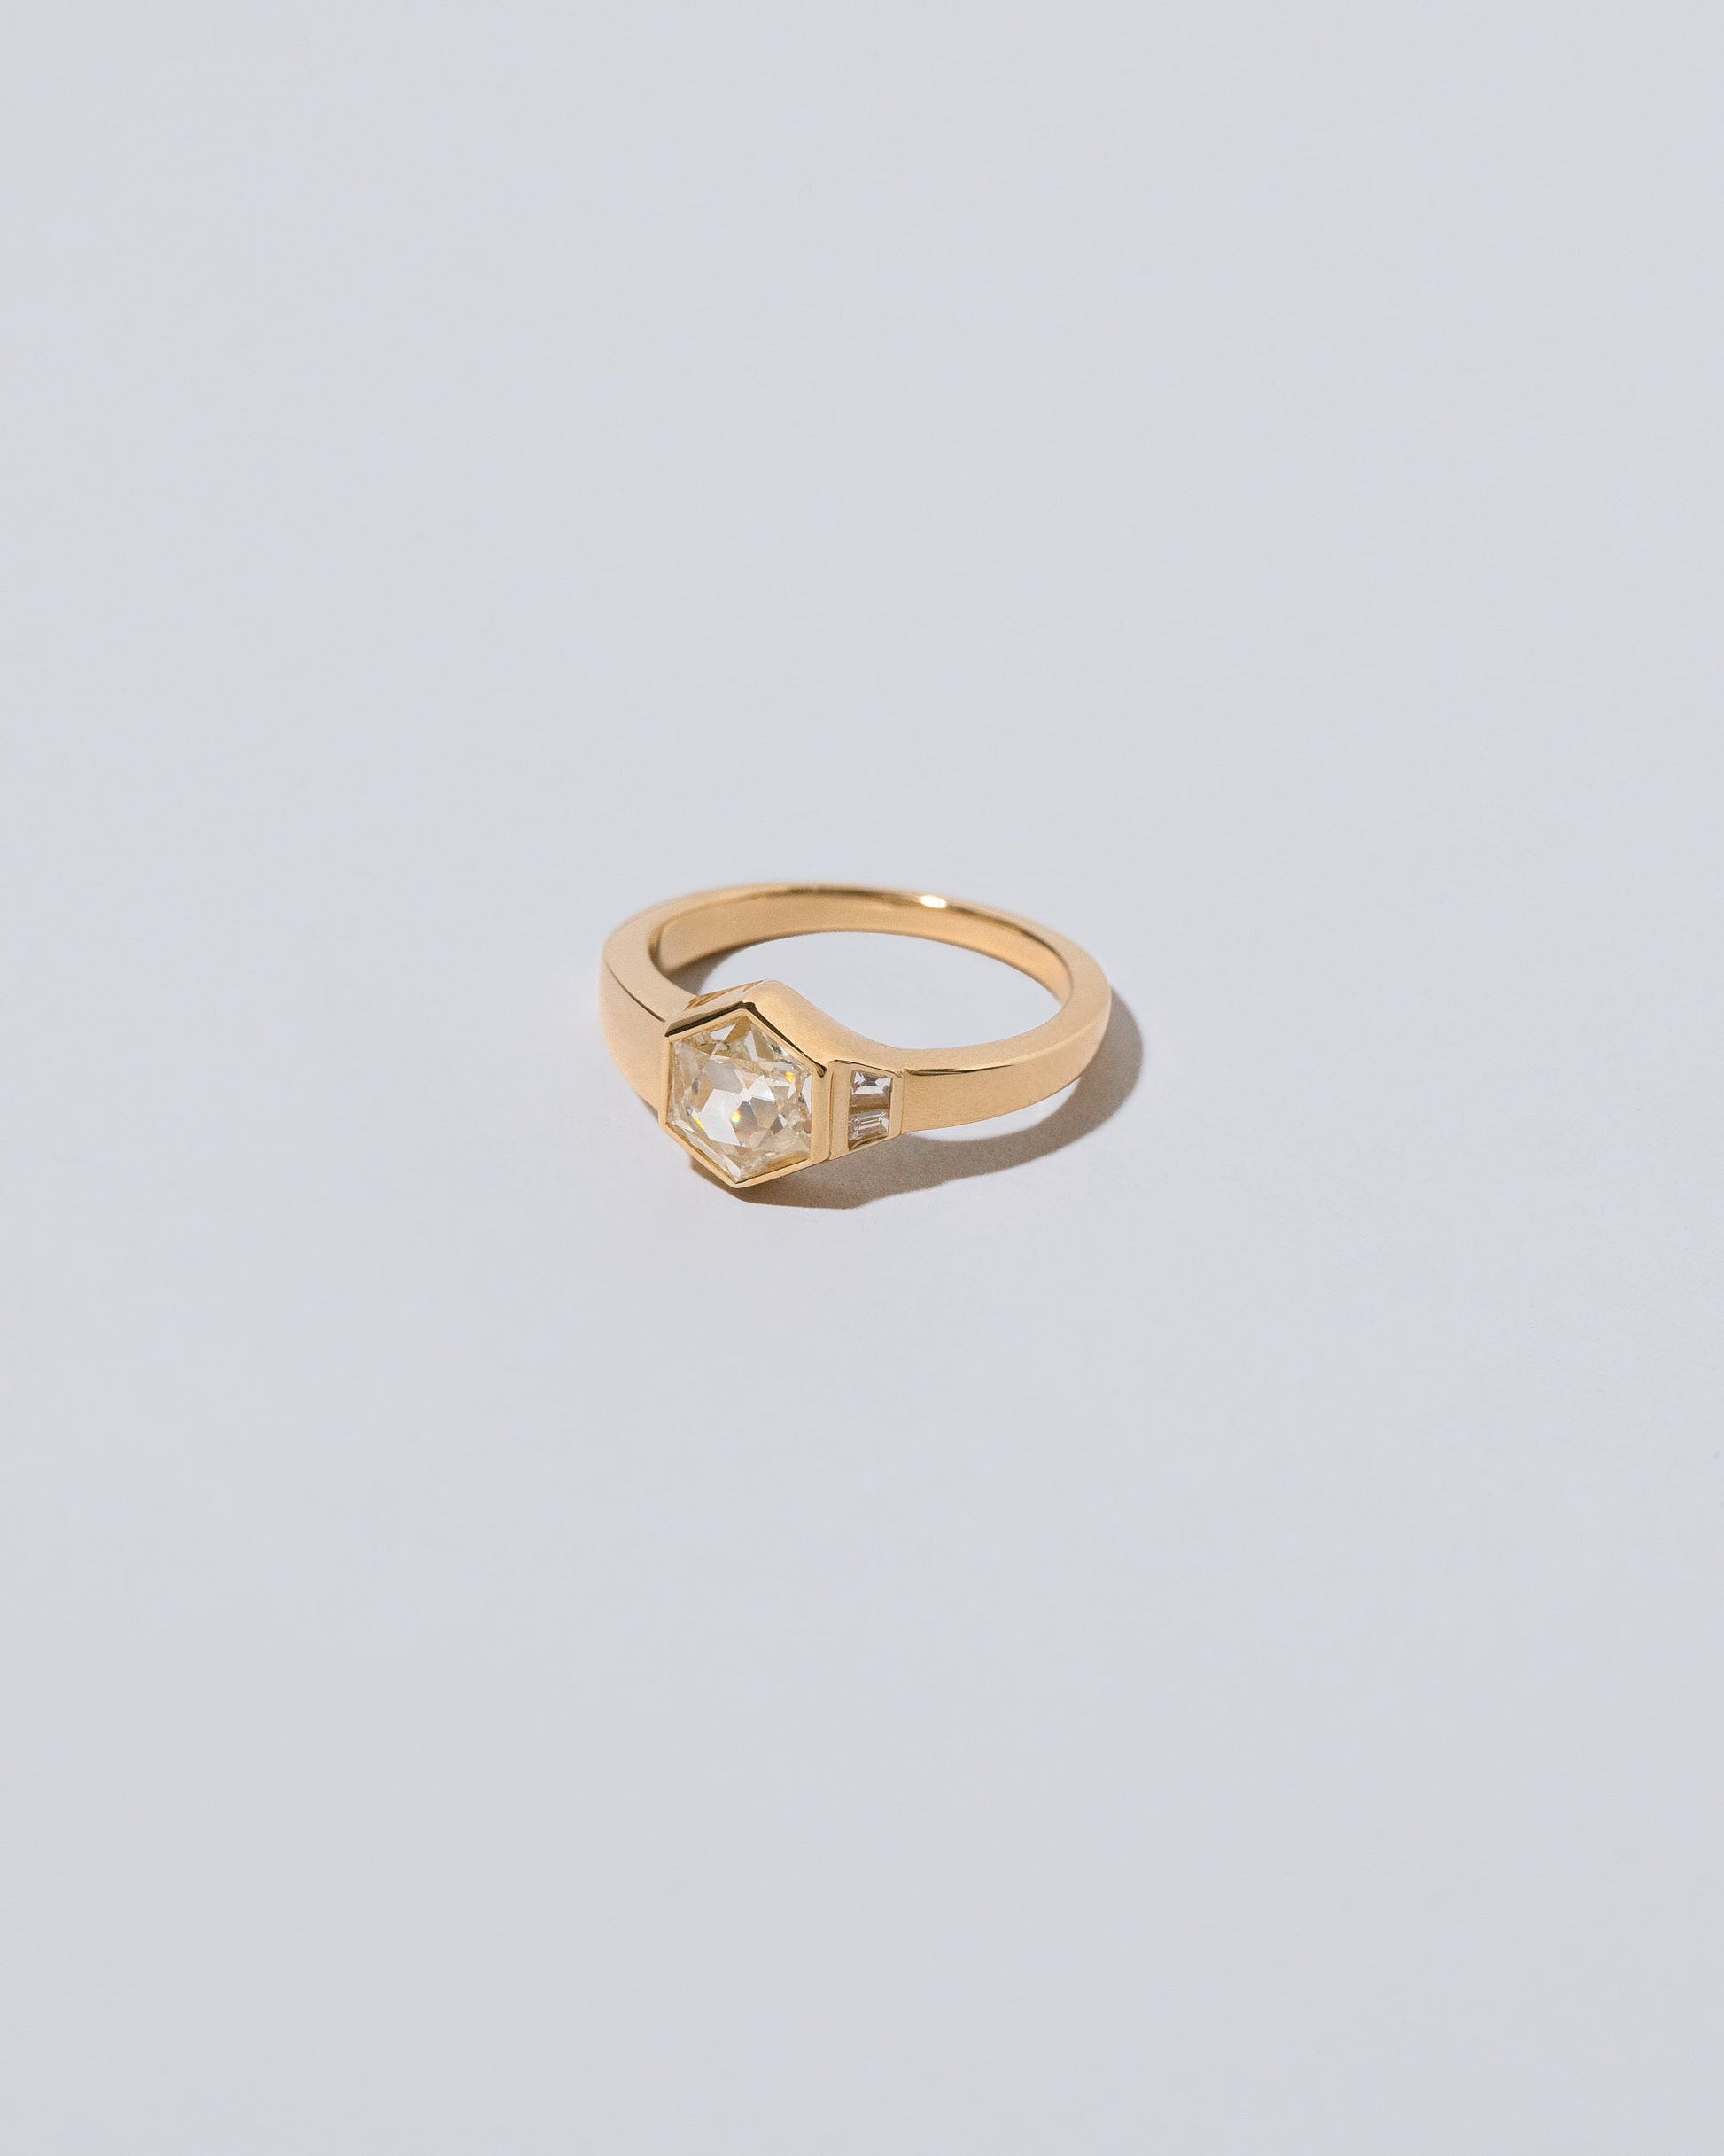 Product photo of the Starflyer Ring on a light color background